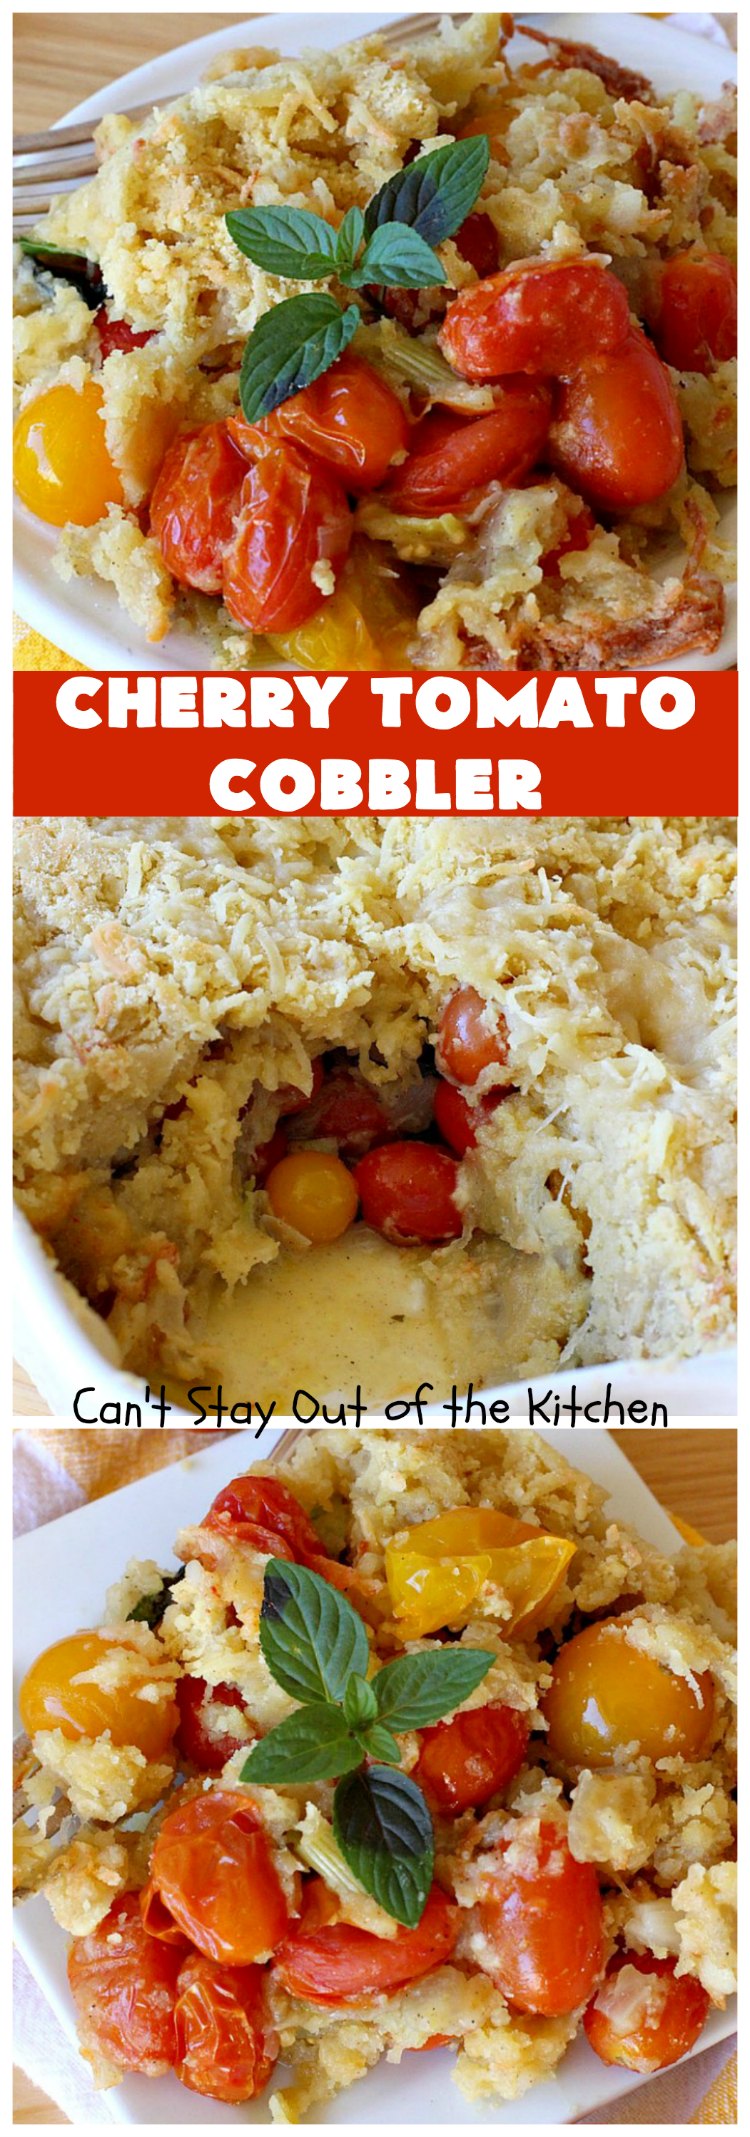 Cherry Tomato Cobbler | Can't Stay Out of the Kitchen | this delicious #casserole #recipe is made with cherry & sunburst #tomatoes.  The #cobbler topping includes a six-cheese #Italian blend so this dish is very sumptuous and savory. Terrific #SideDish for #holidays like #Thanksgiving or #Christmas. I made the dish #GlutenFree & it was a hit with everyone! #CherryTomatoCobbler